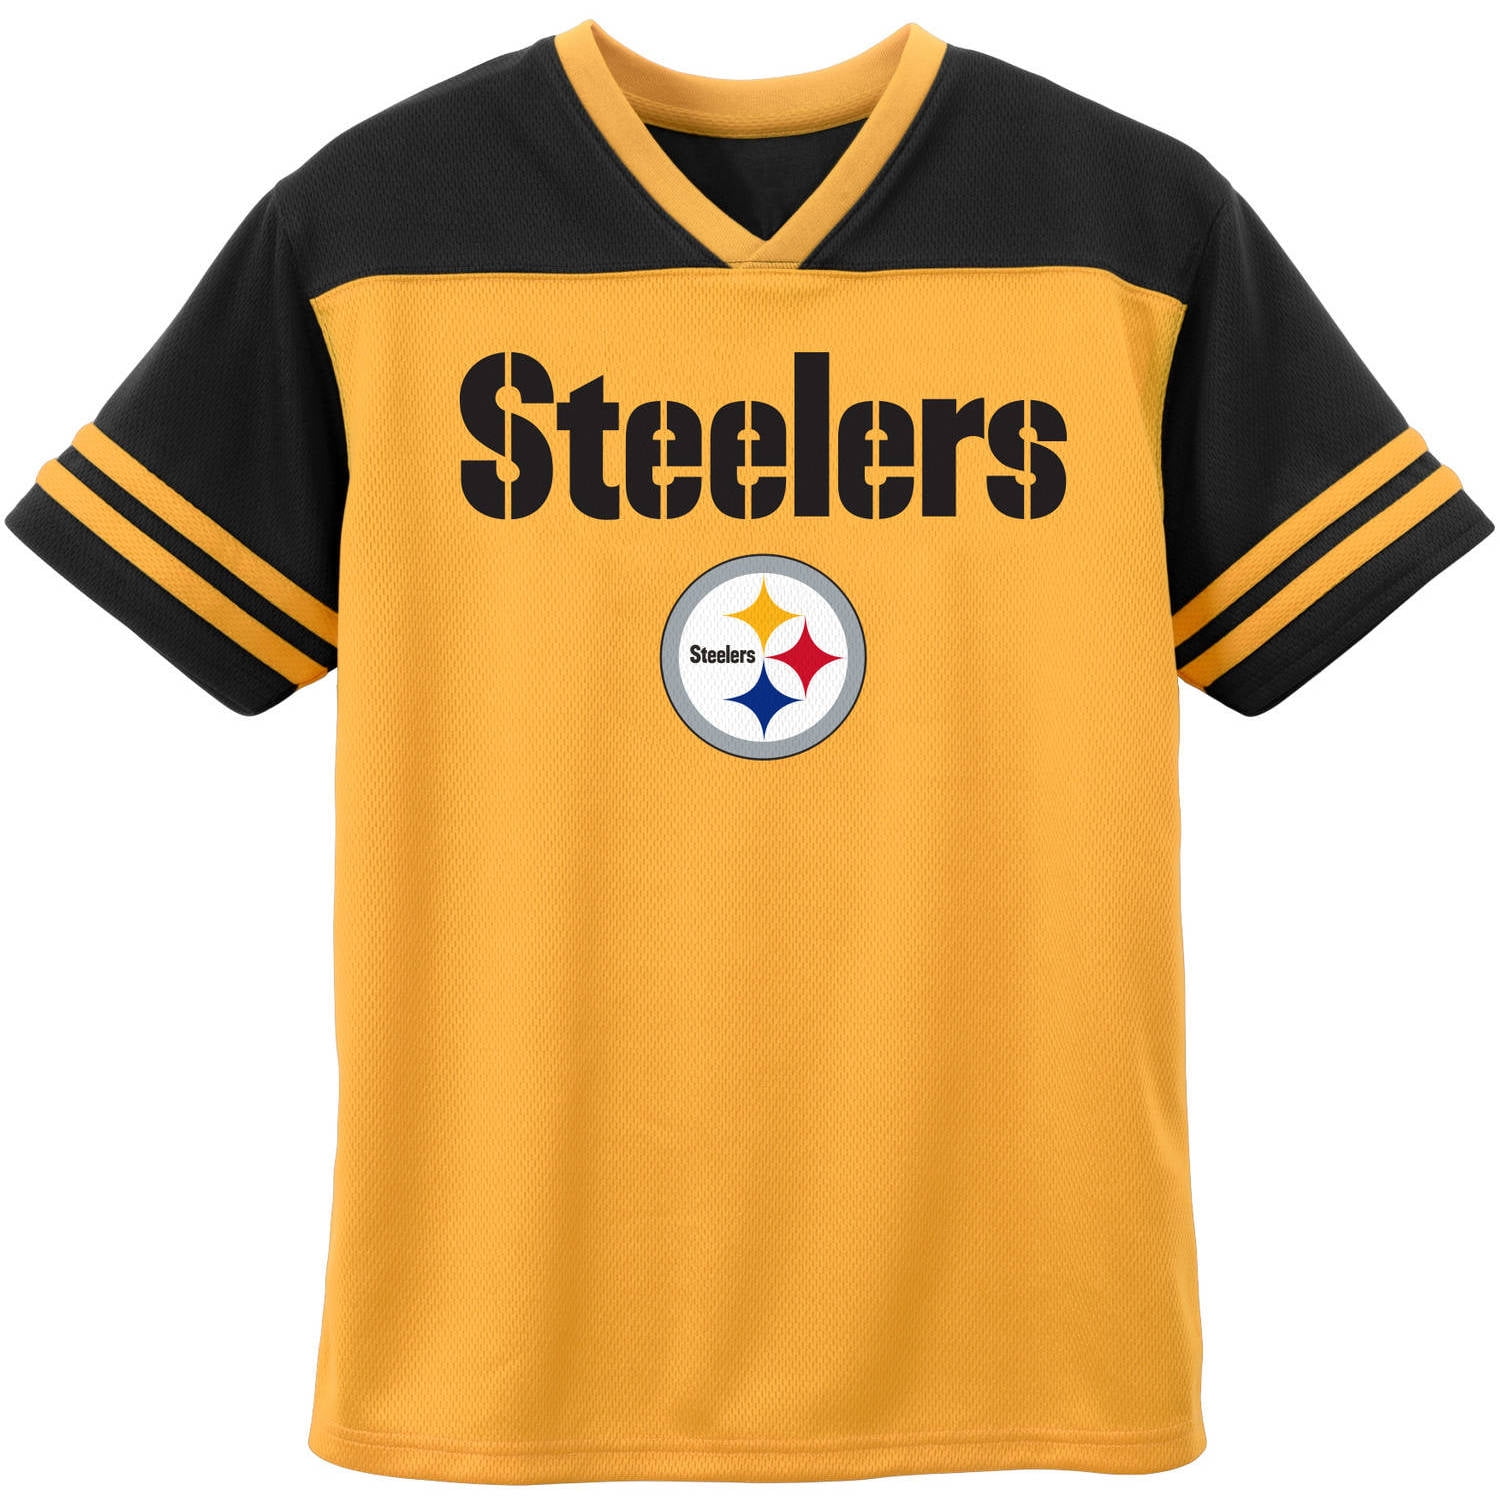 NFL - NFL Pittsburgh Steelers Toddler Short Sleeve Fashion Top ...